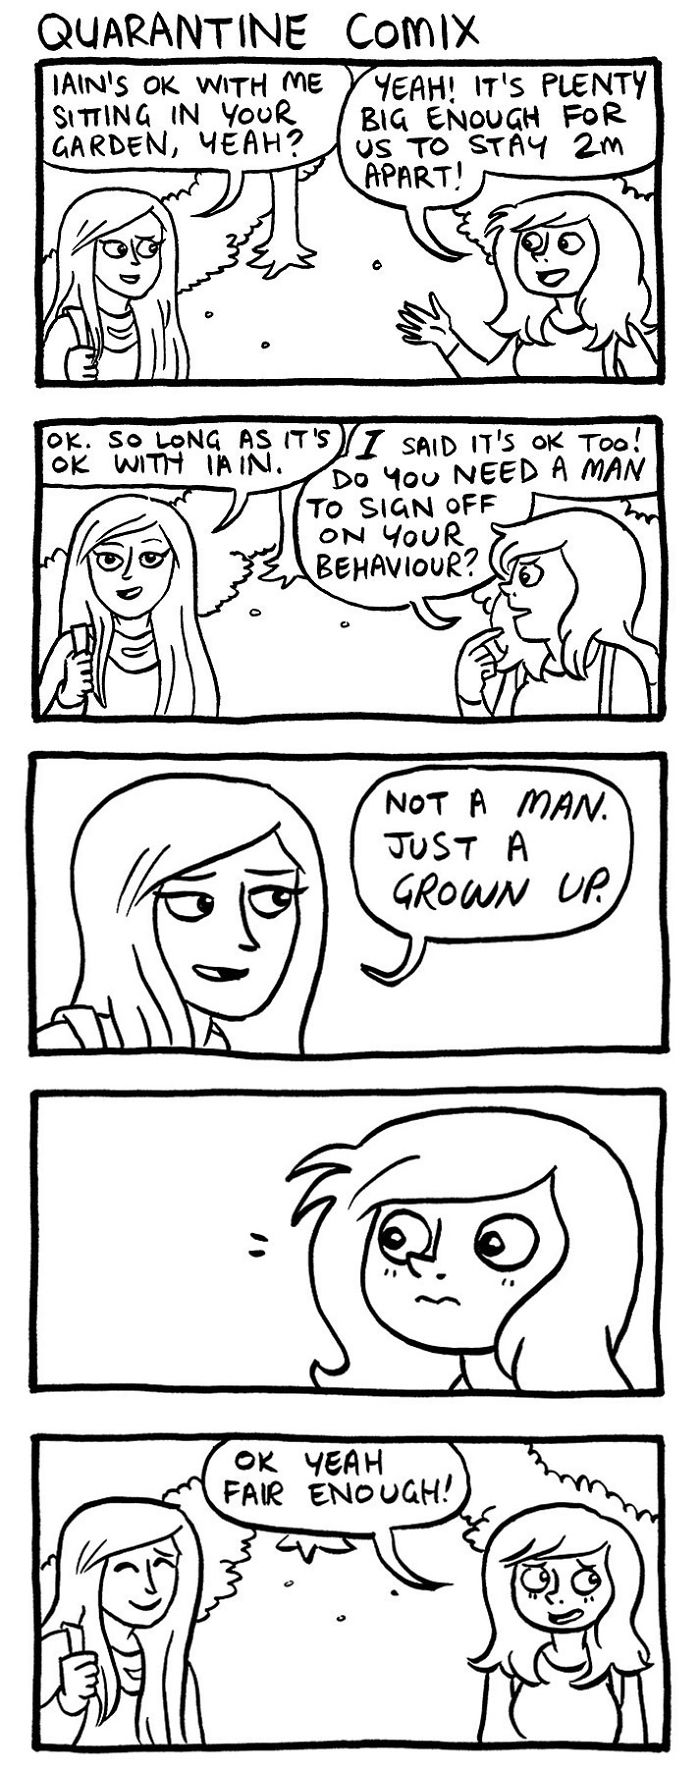 Quarantine Comix: 40 Relatable And Devastatingly Honest Comics About Lockdown By Rachael Smith